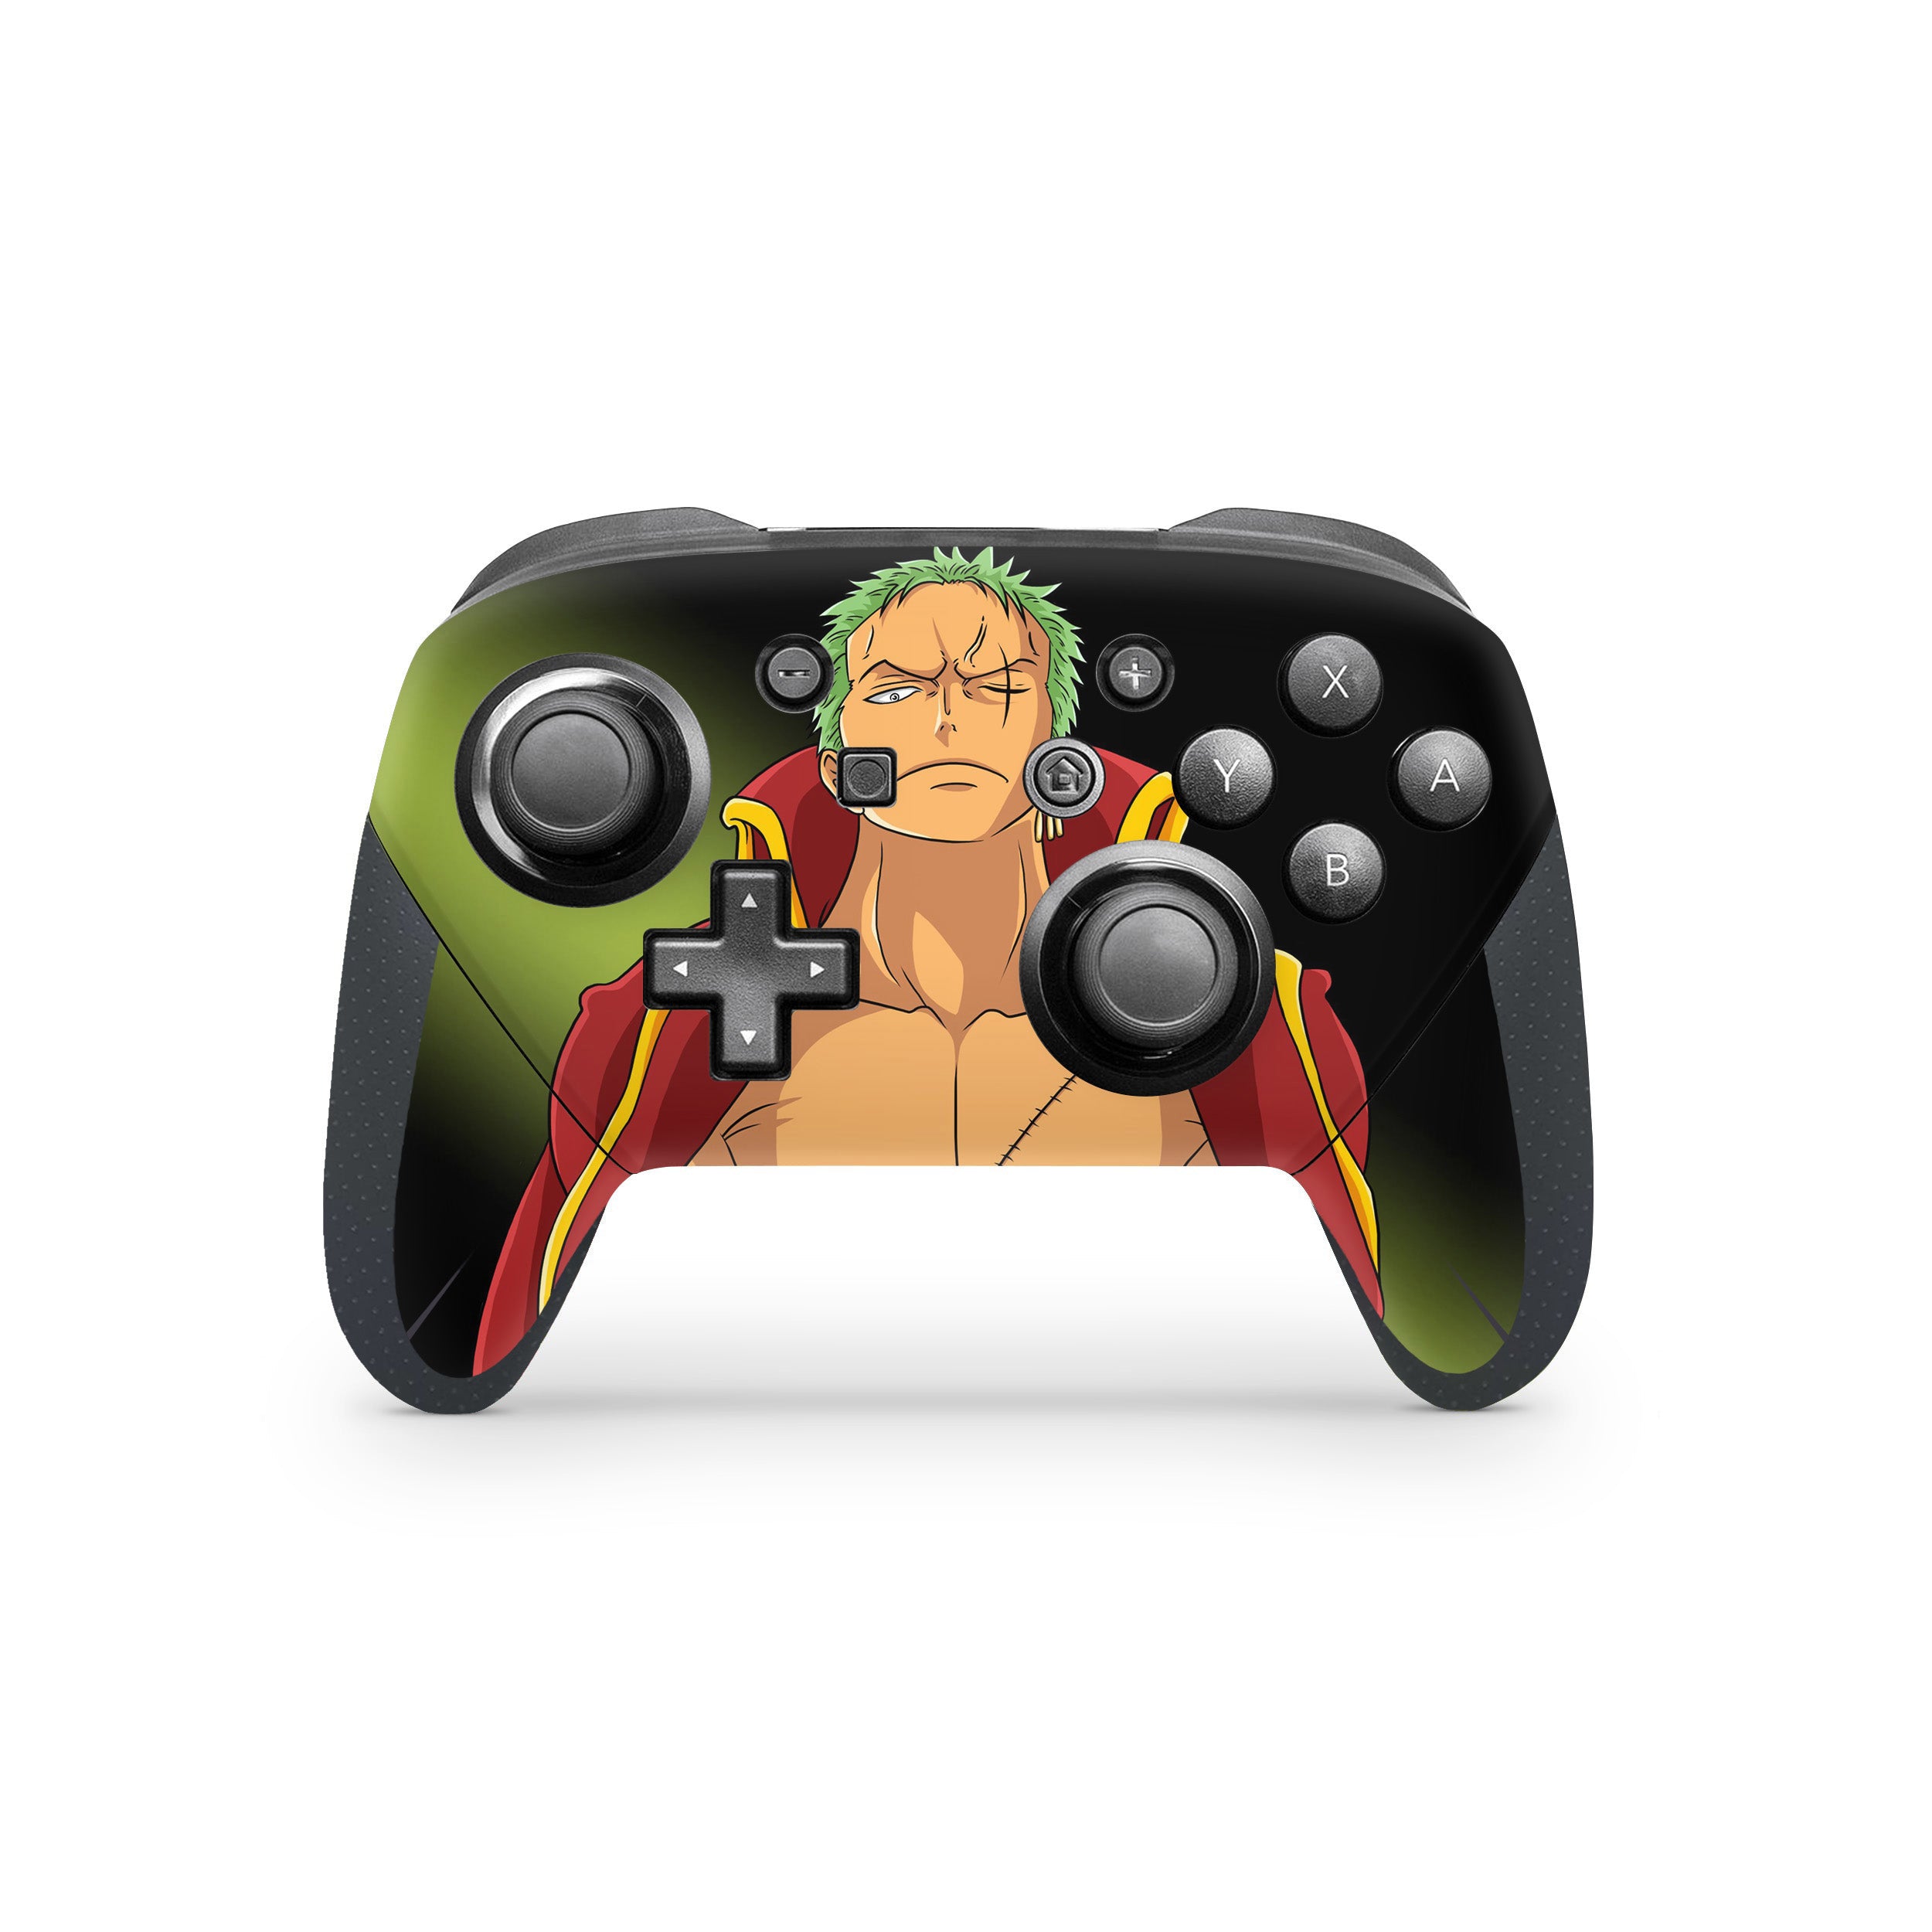 A video game skin featuring a One Piece Monkey D Luffy design for the Switch Pro Controller.